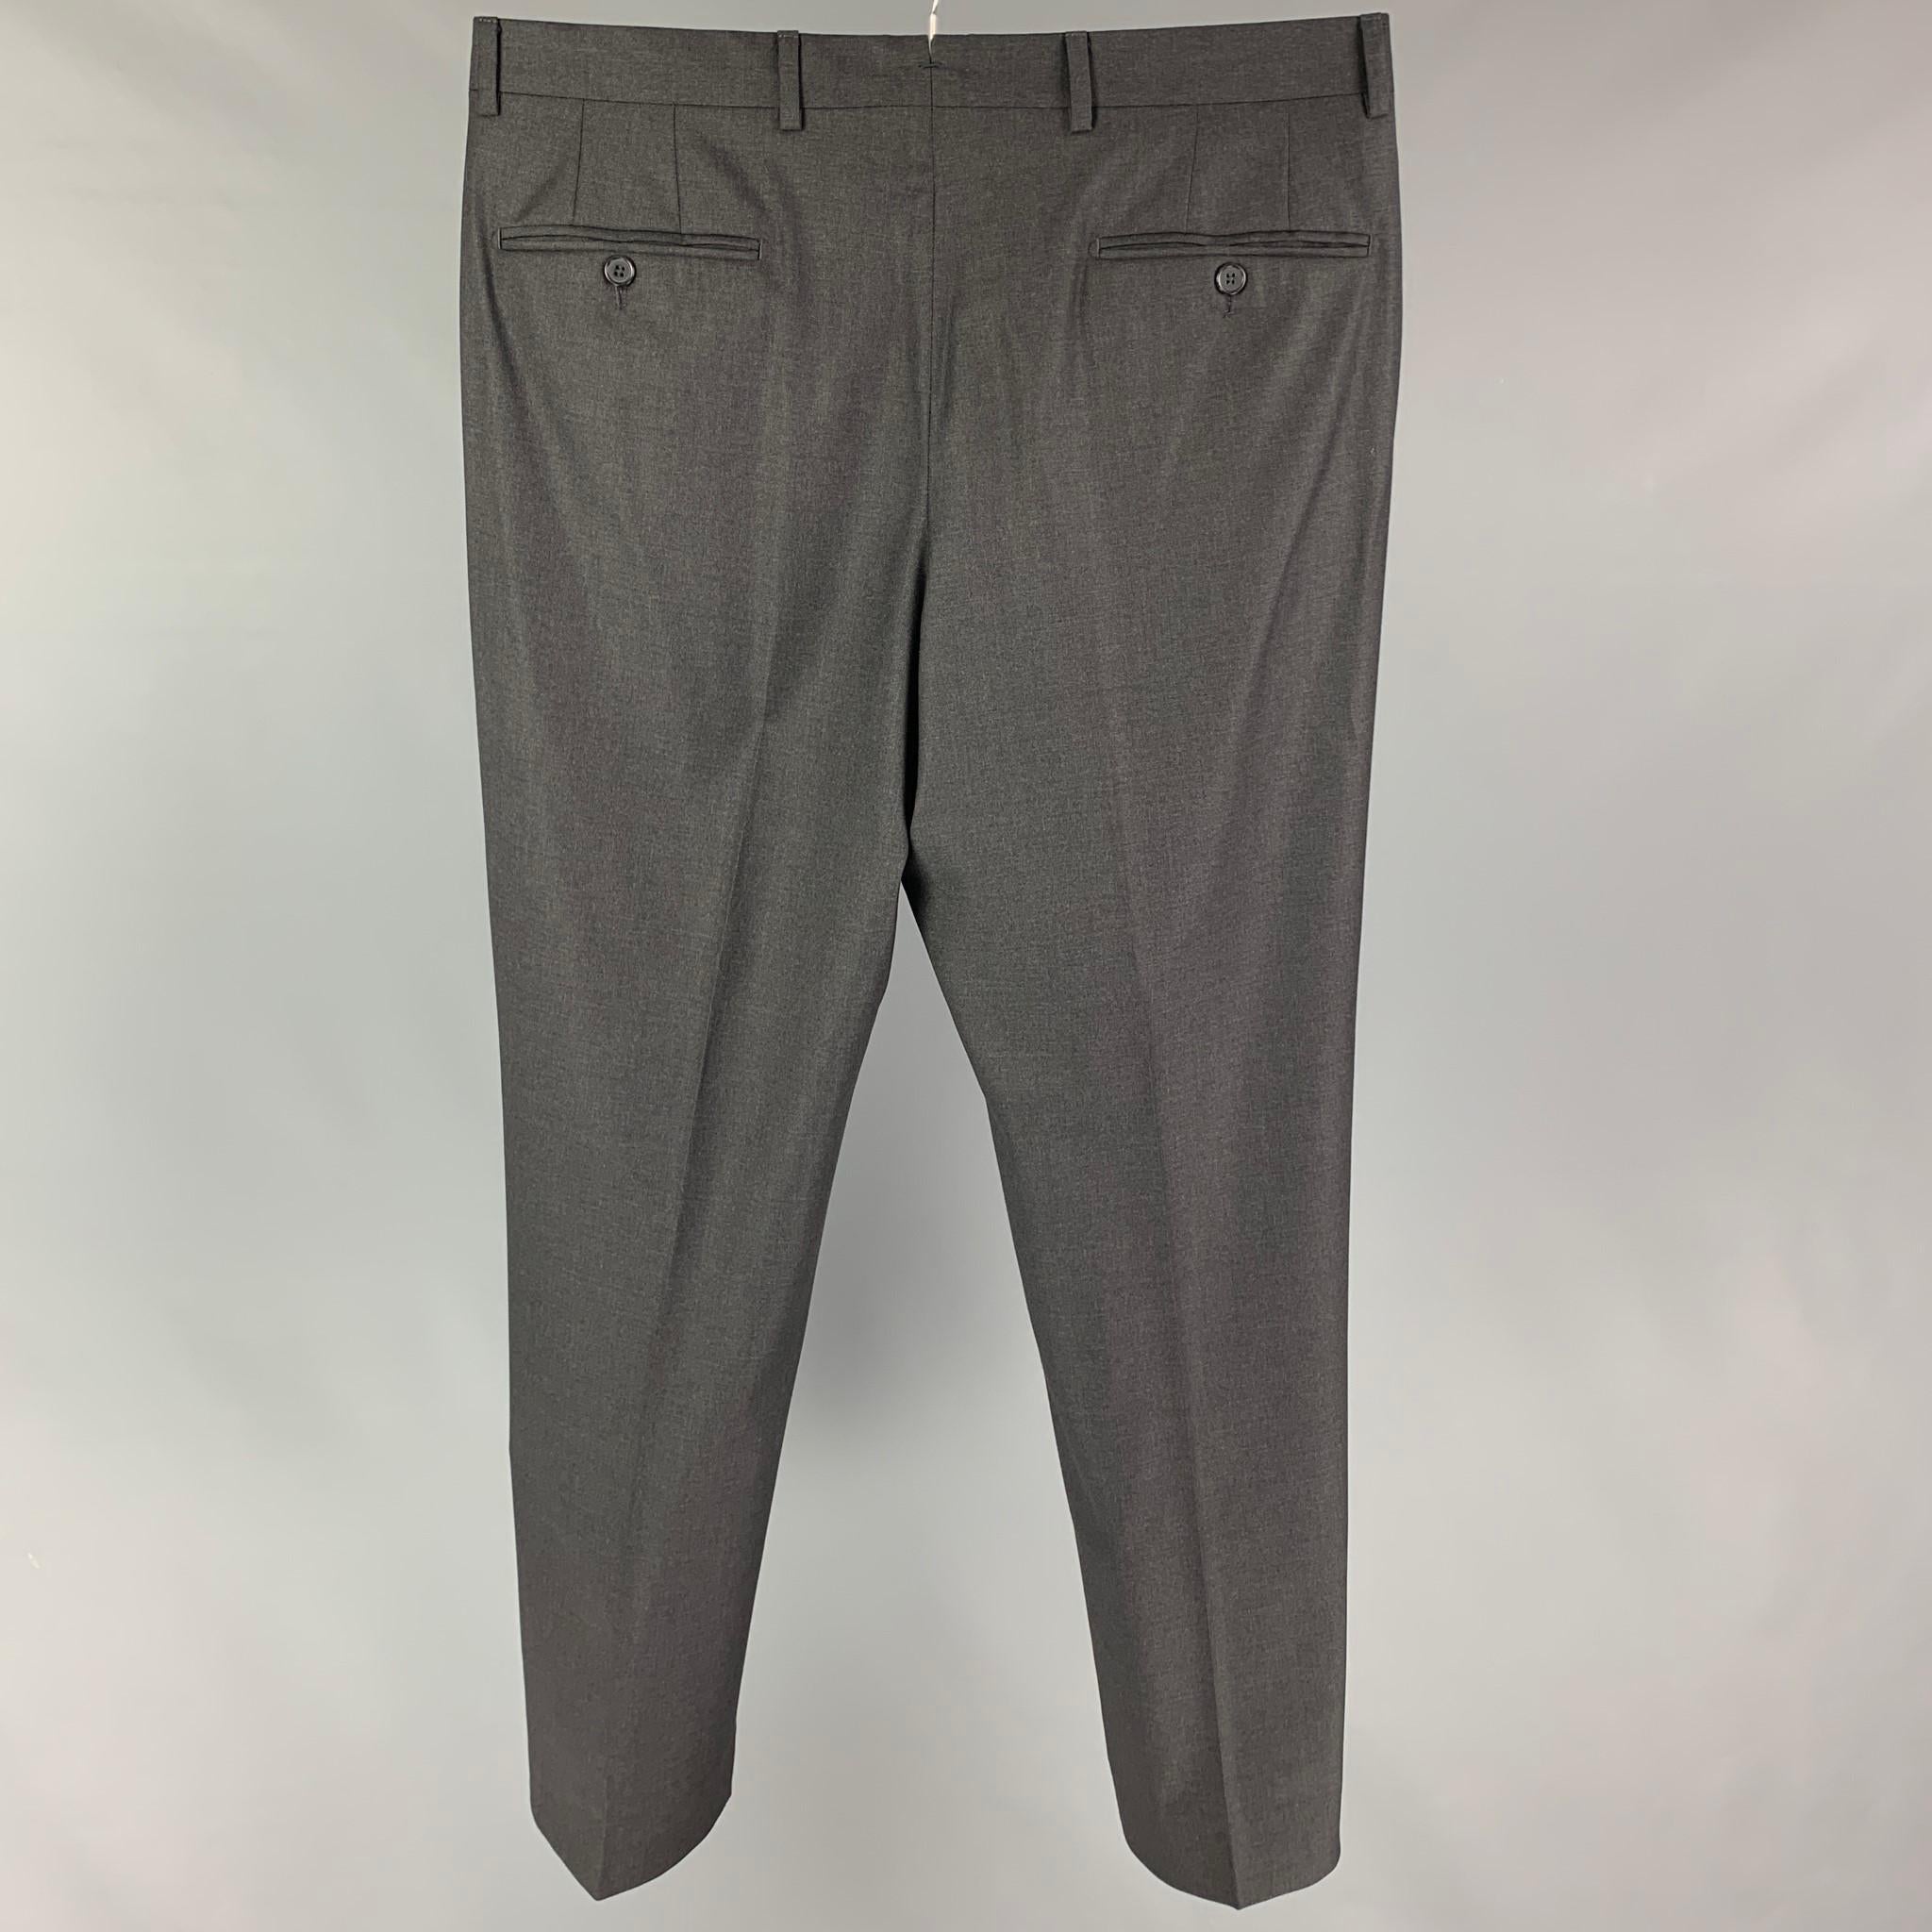 NEIMAN MARCUS dress pants comes in a grey wool by Loro Piana featuring a flat front, zip fly, and a double button closure. 

Very Good Pre-Owned Condition.
Marked: 34

Measurements:

Waist: 36 in.
Rise: 11 in.
Inseam: 32 in. 